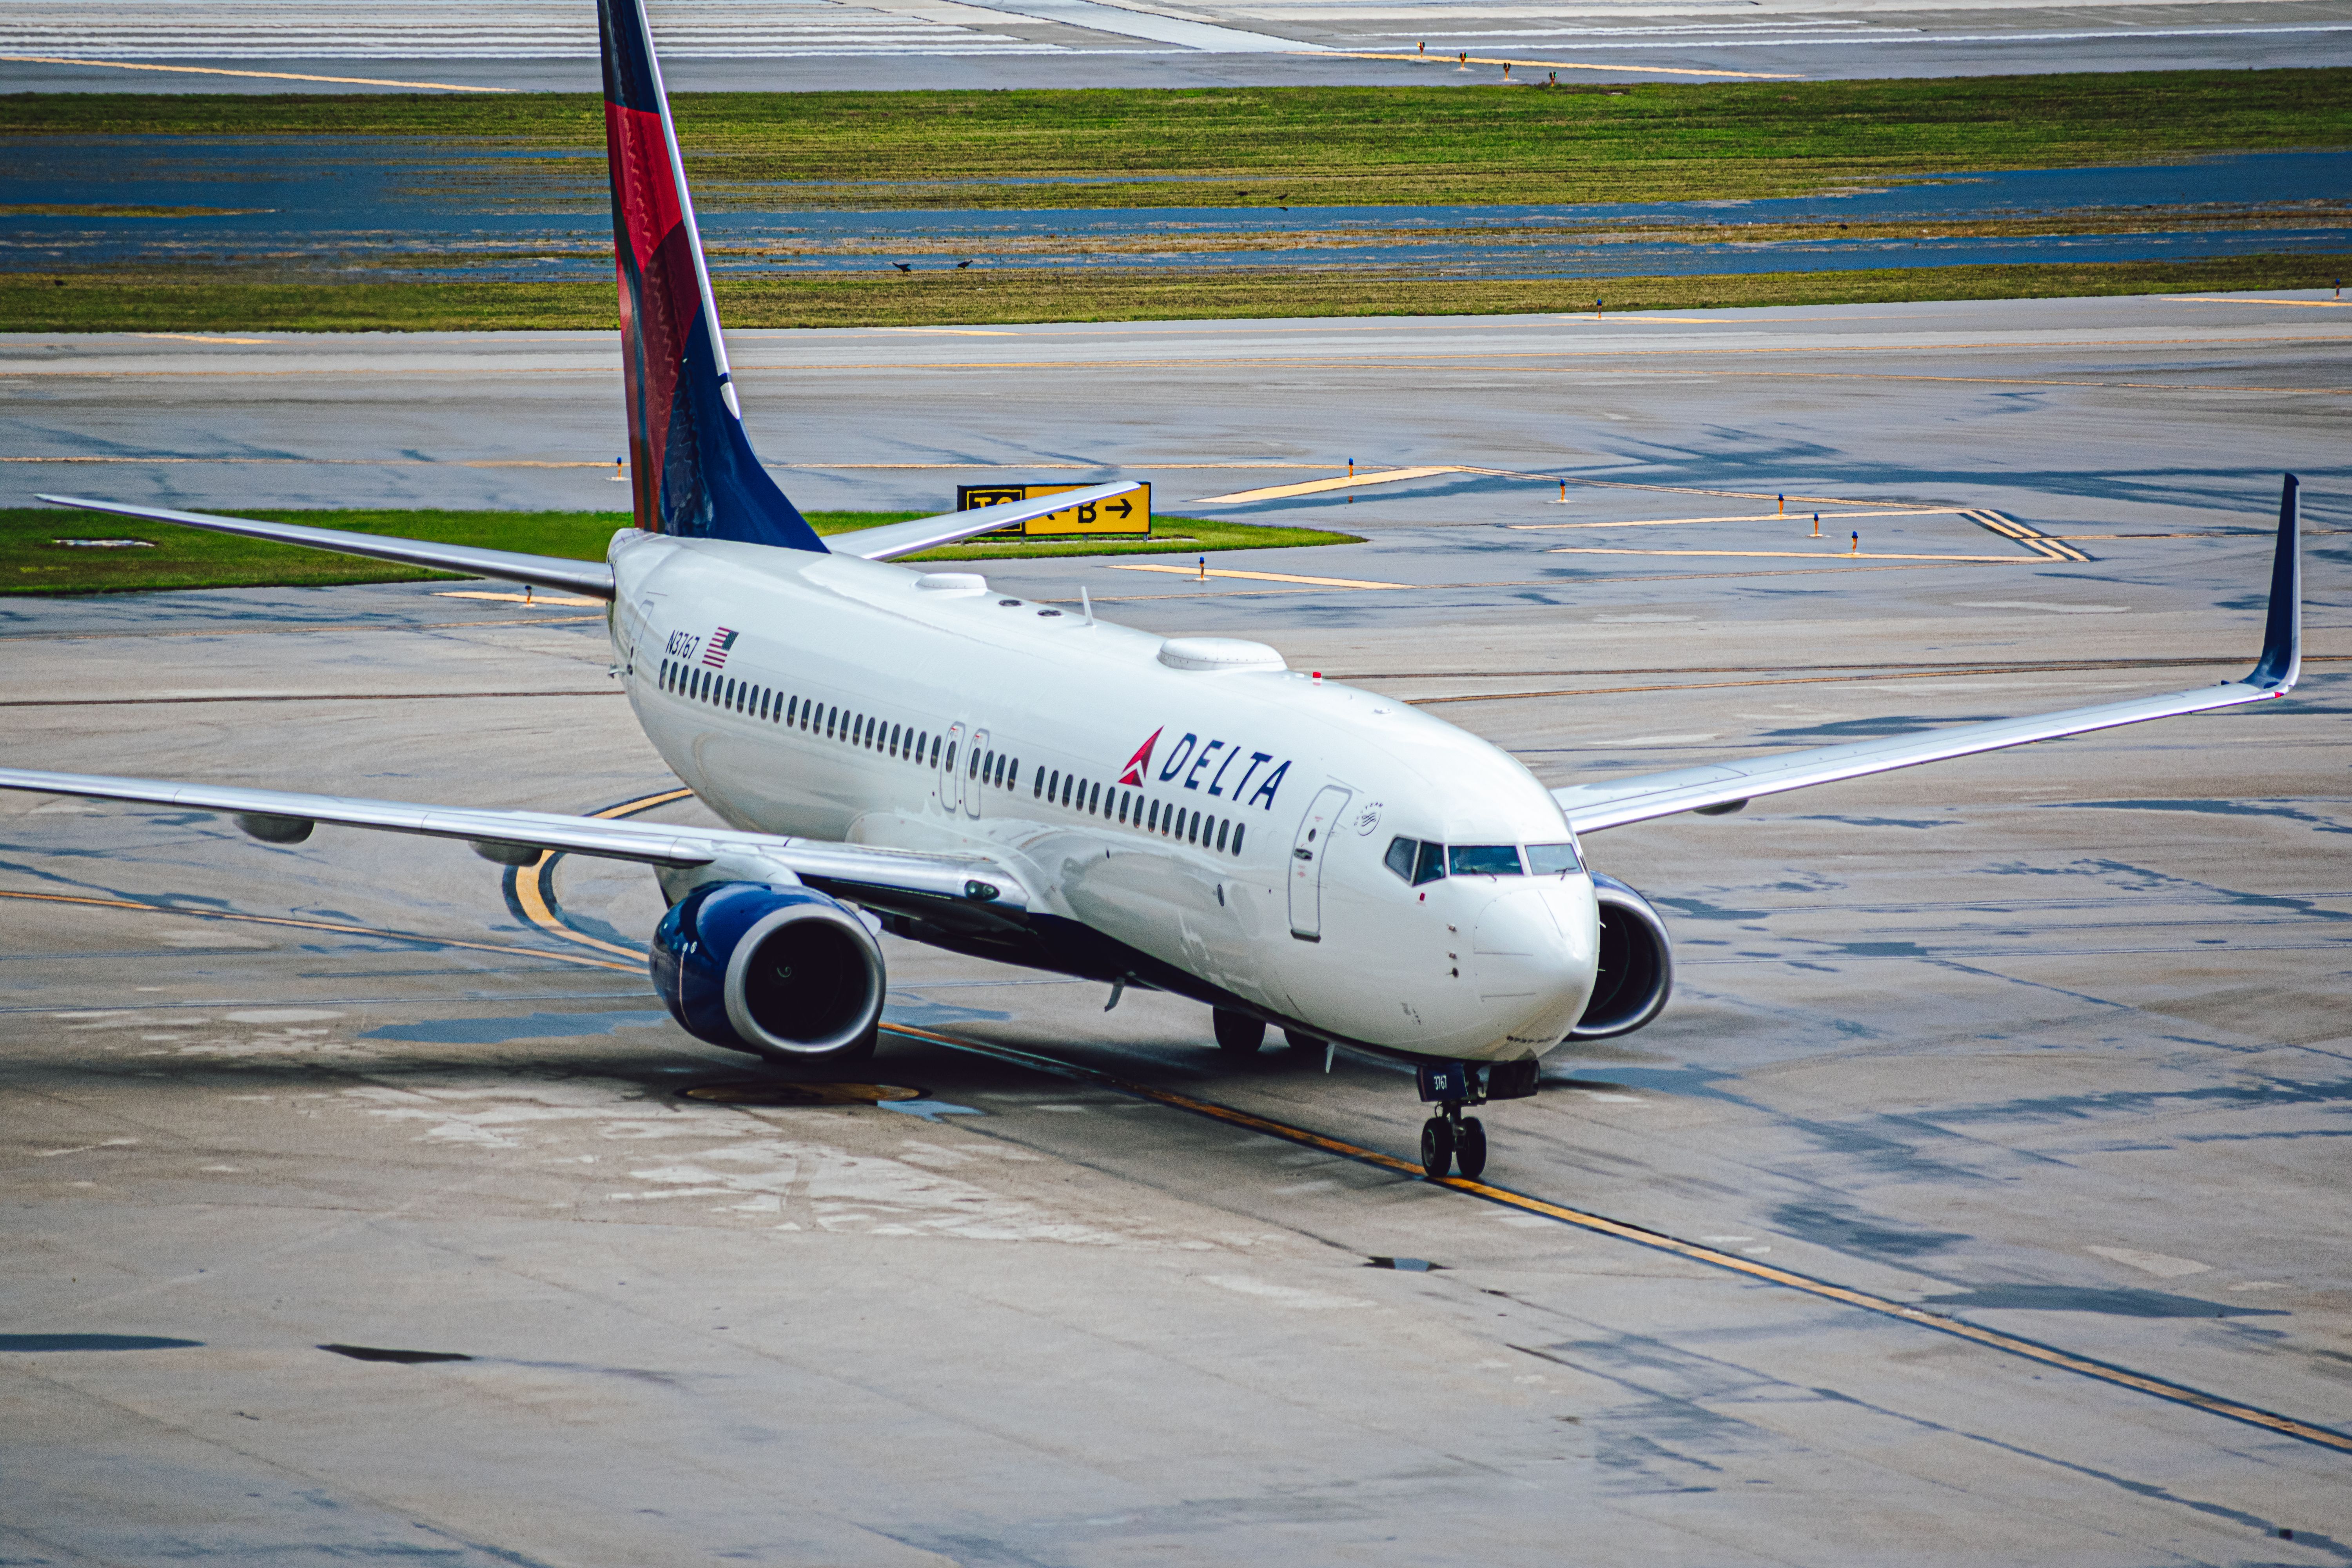 Delta Air Lines Boeing 737-800 taxiing at FLL